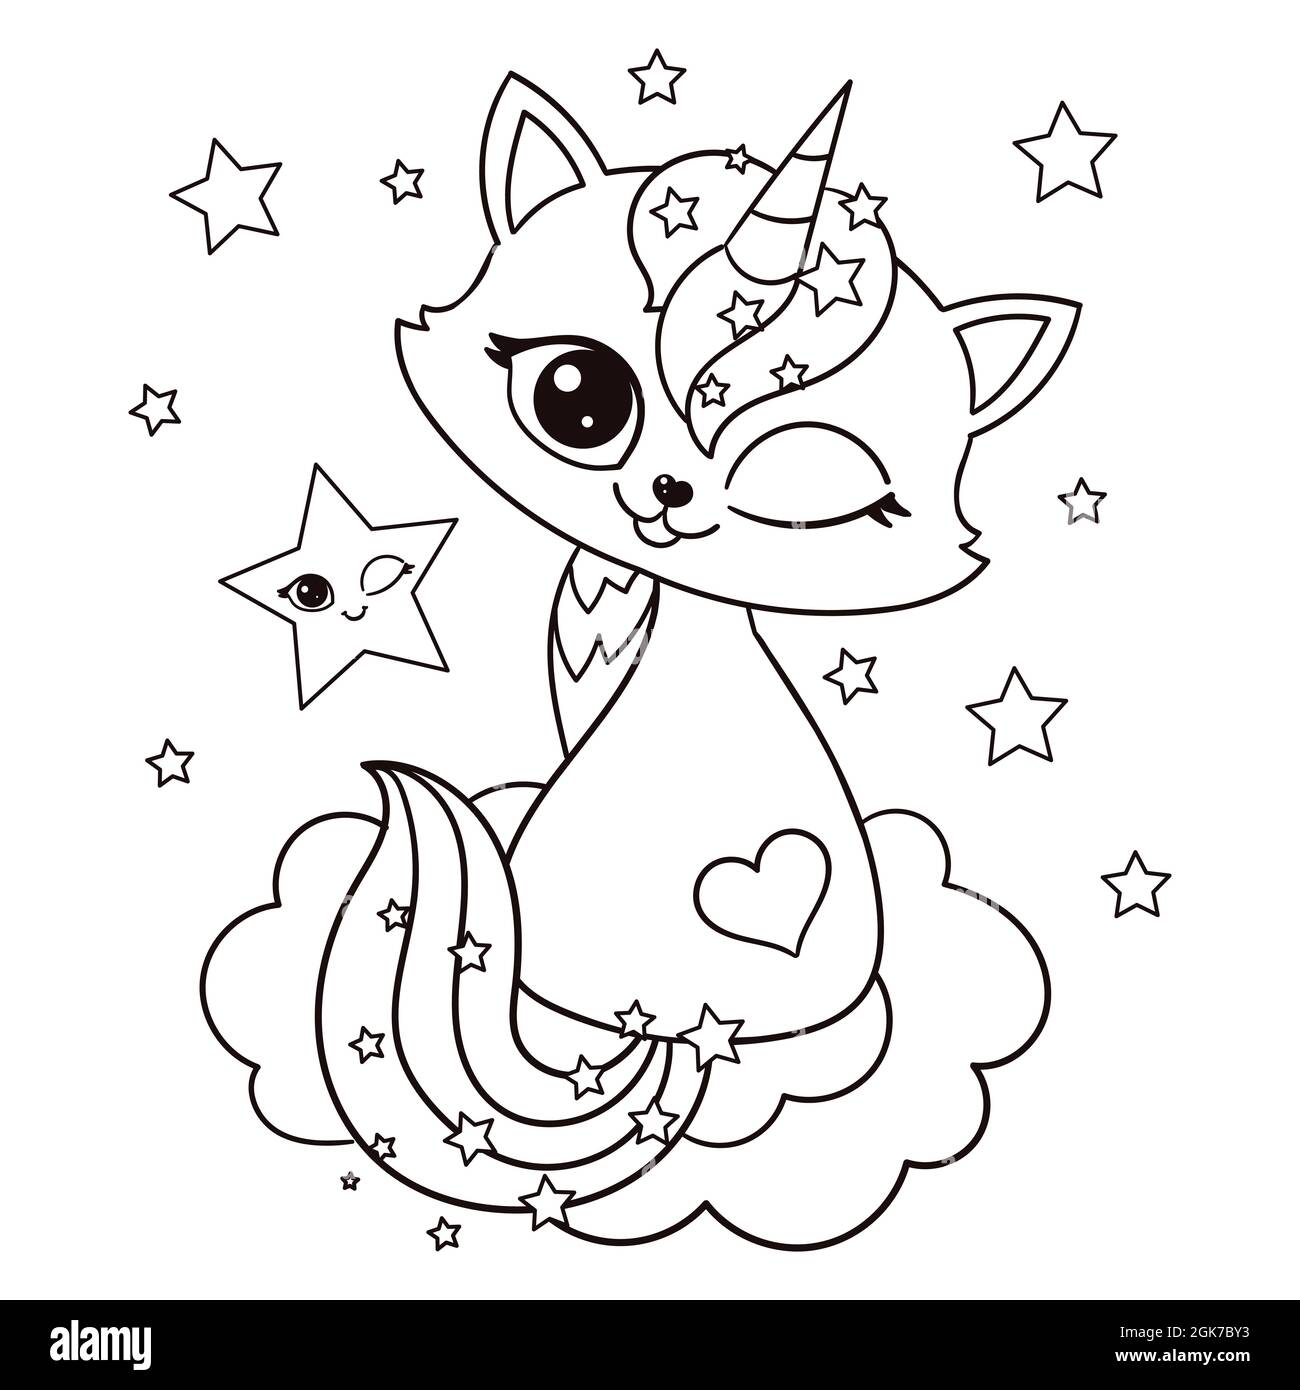 cute cat unicorn black and white linear image vector stock vector image art alamy